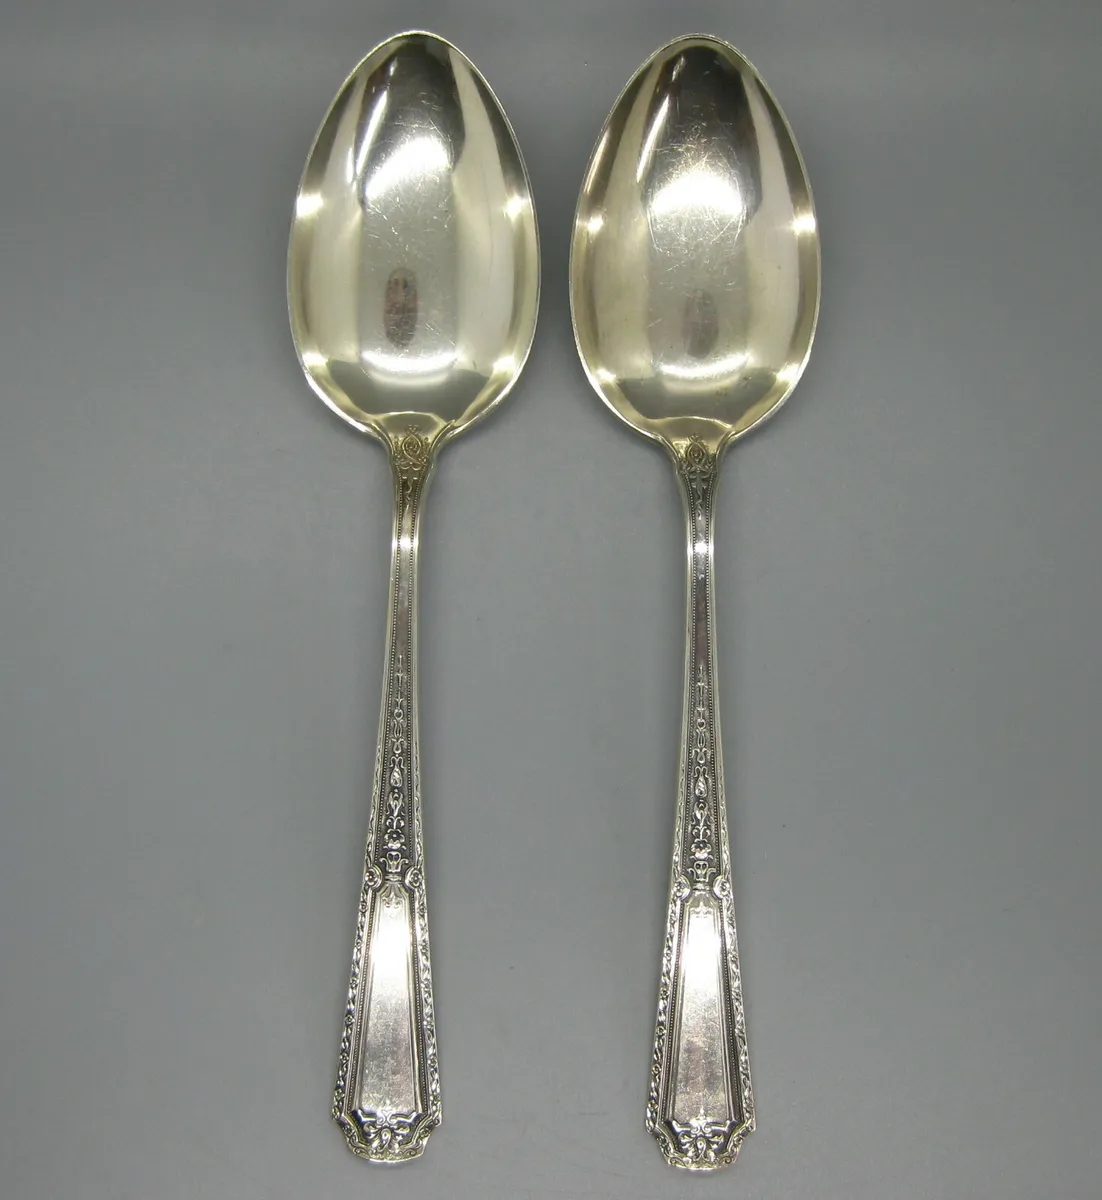 2 Antique 1924 Towle Sterling Silver LOUIS XIV Large Solid Serving Spoons